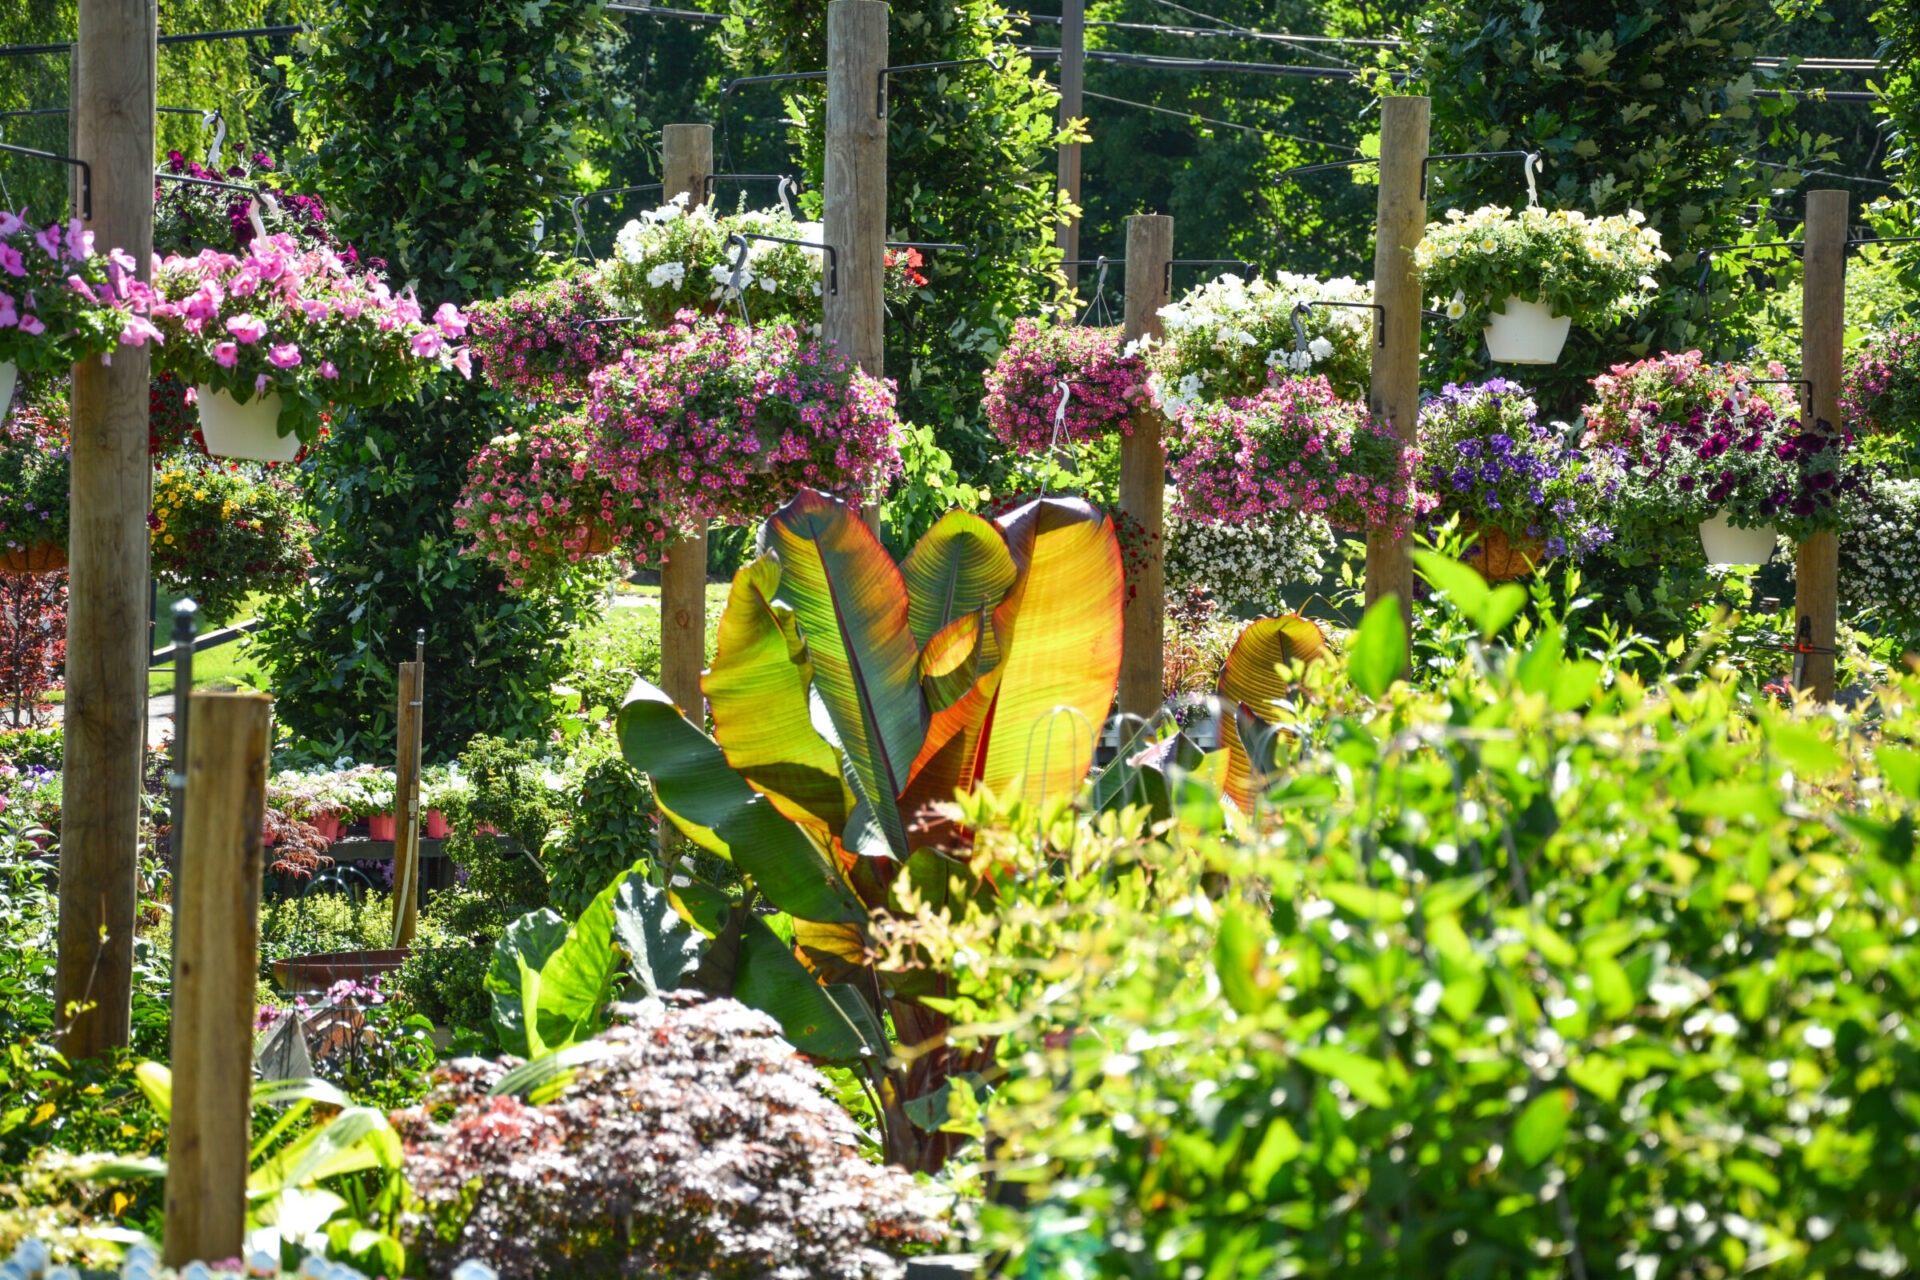 A vibrant garden with lush foliage and colorful hanging flower baskets on wooden poles, bathed in sunlight, showcasing a variety of plant life.